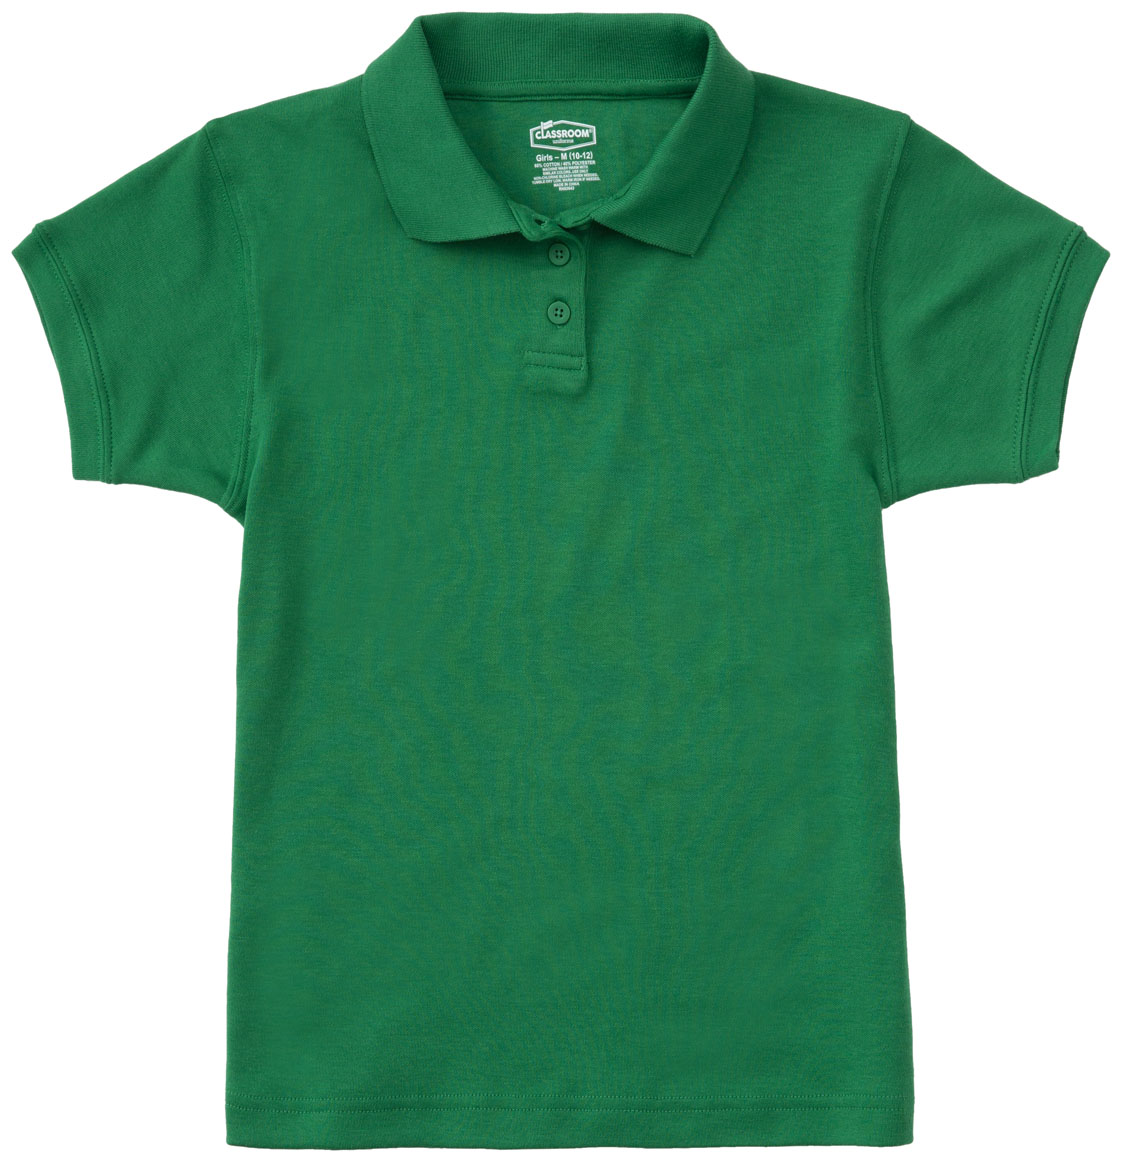 Classroom Girl's Short Sleeve Fitted Interlock Polo